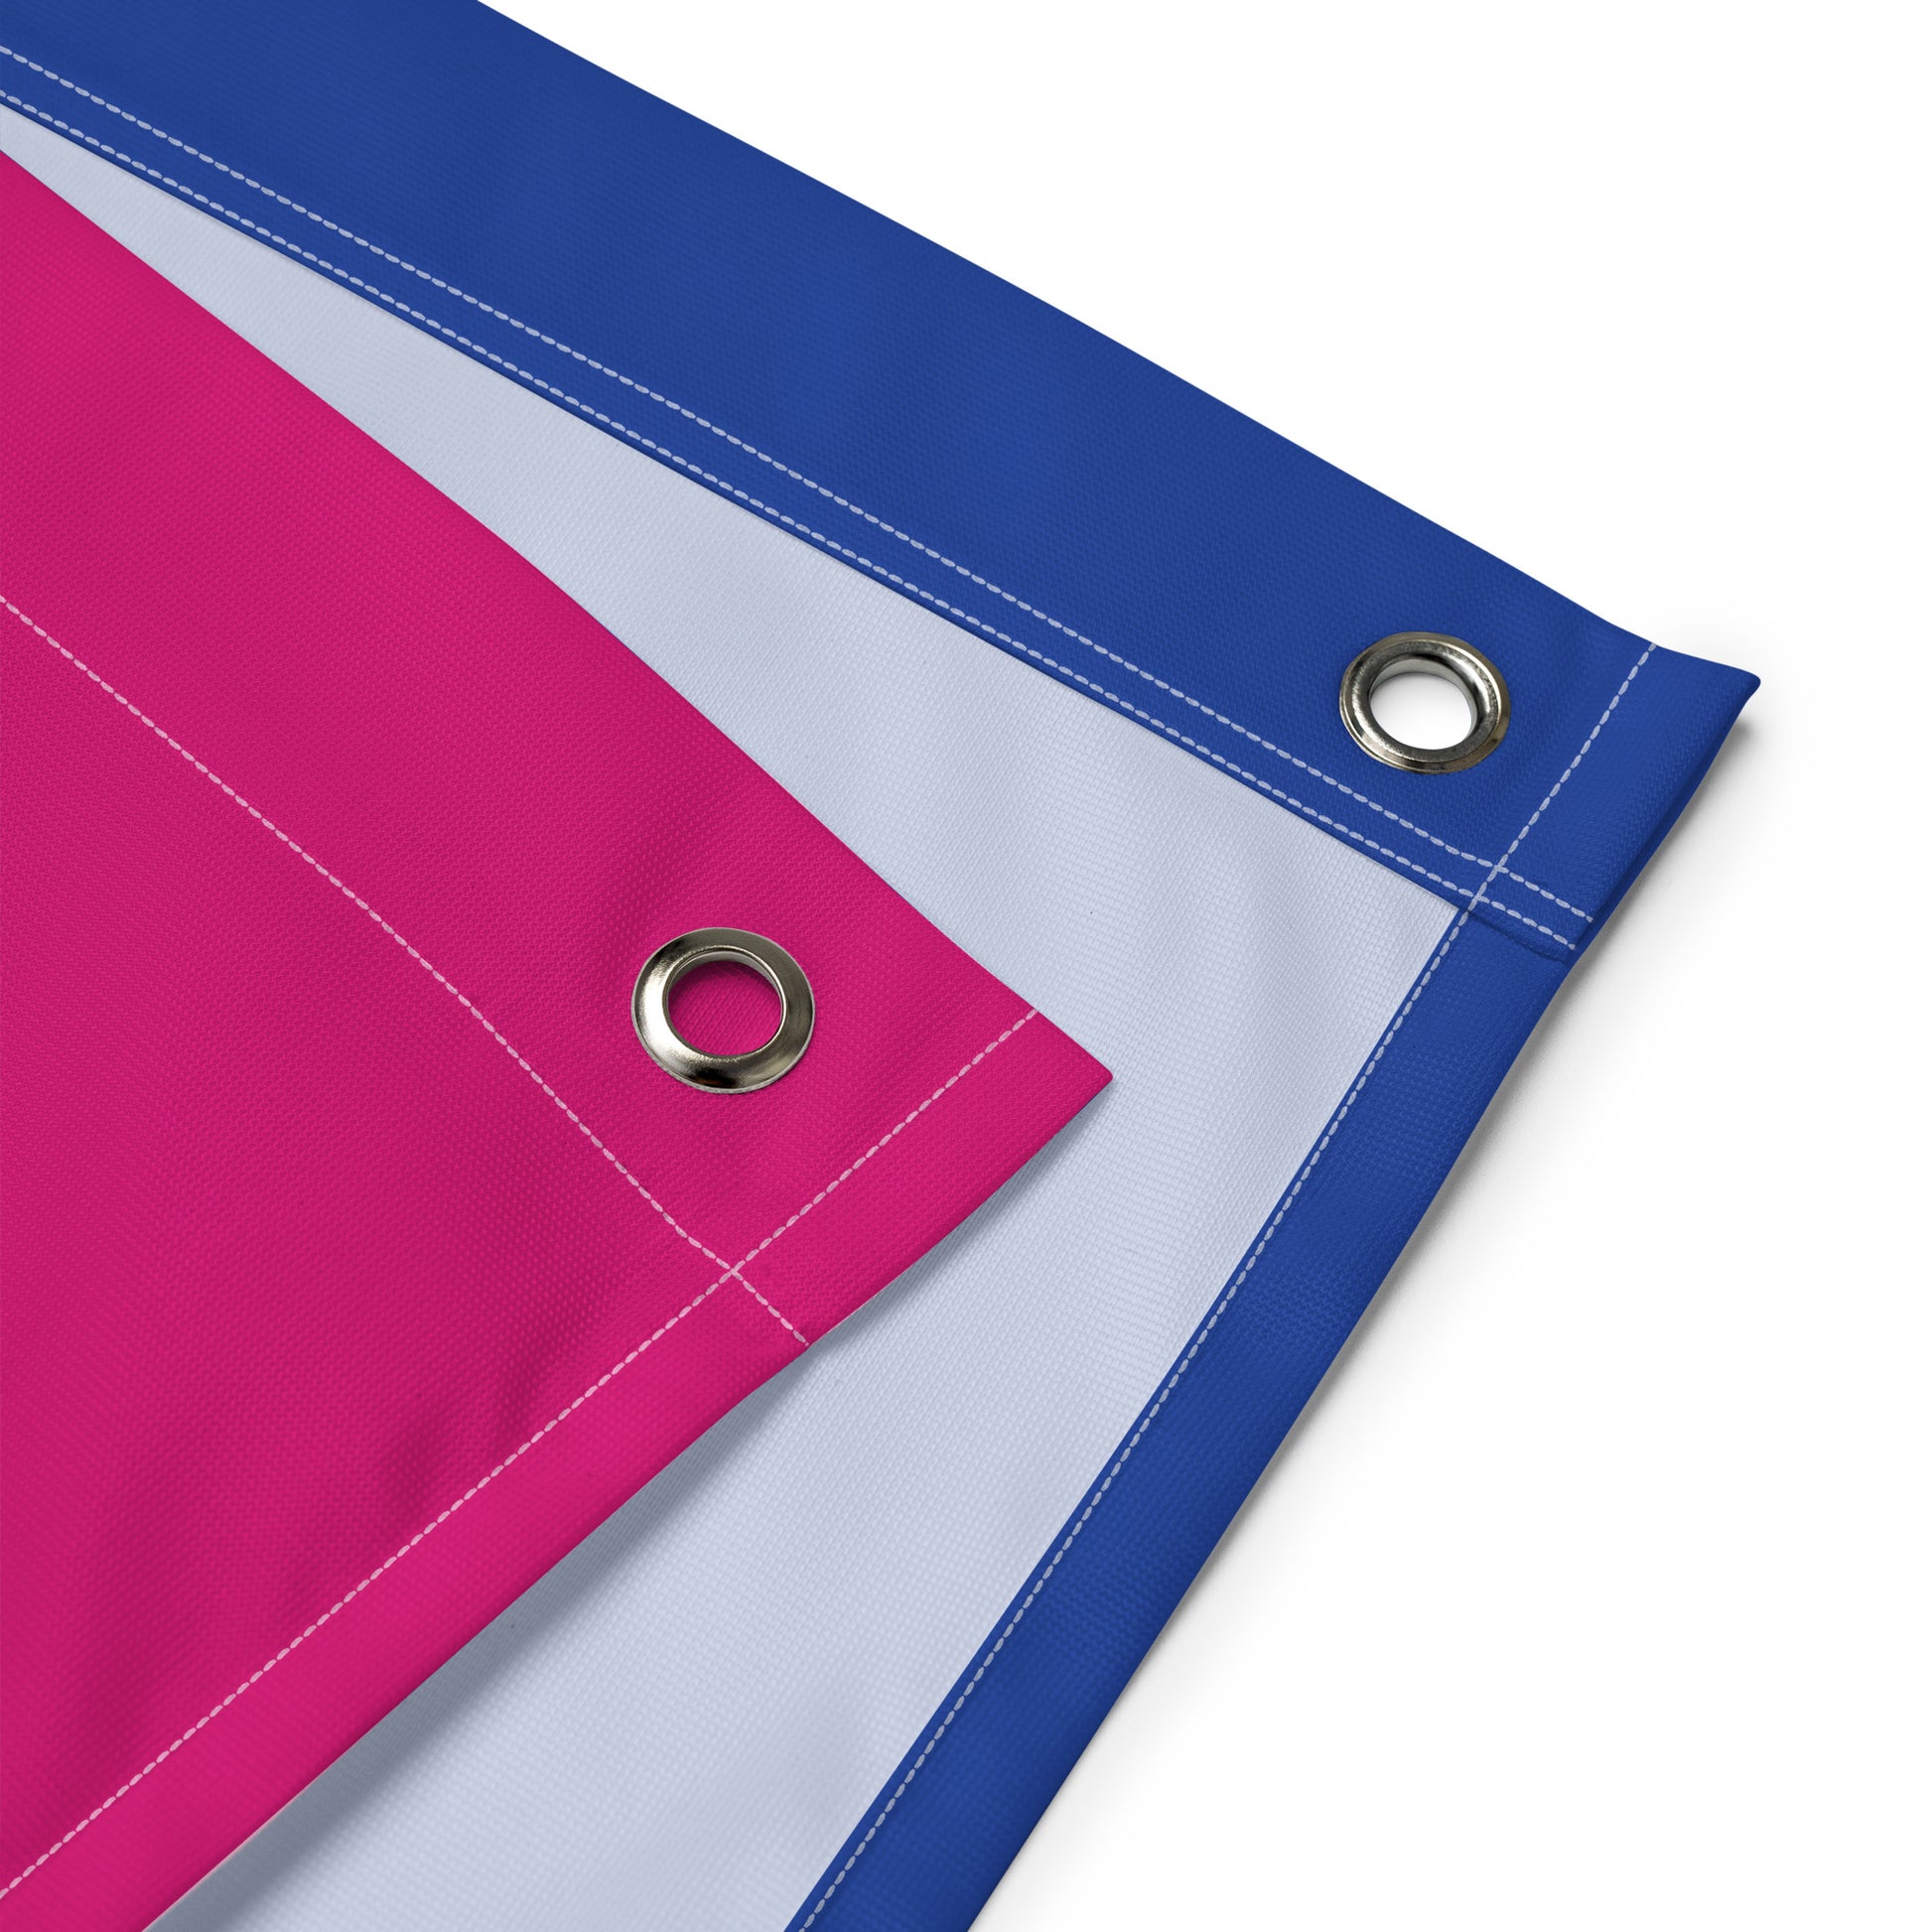 a close-up of the grommets on the bisexual blackbeard pirate flag